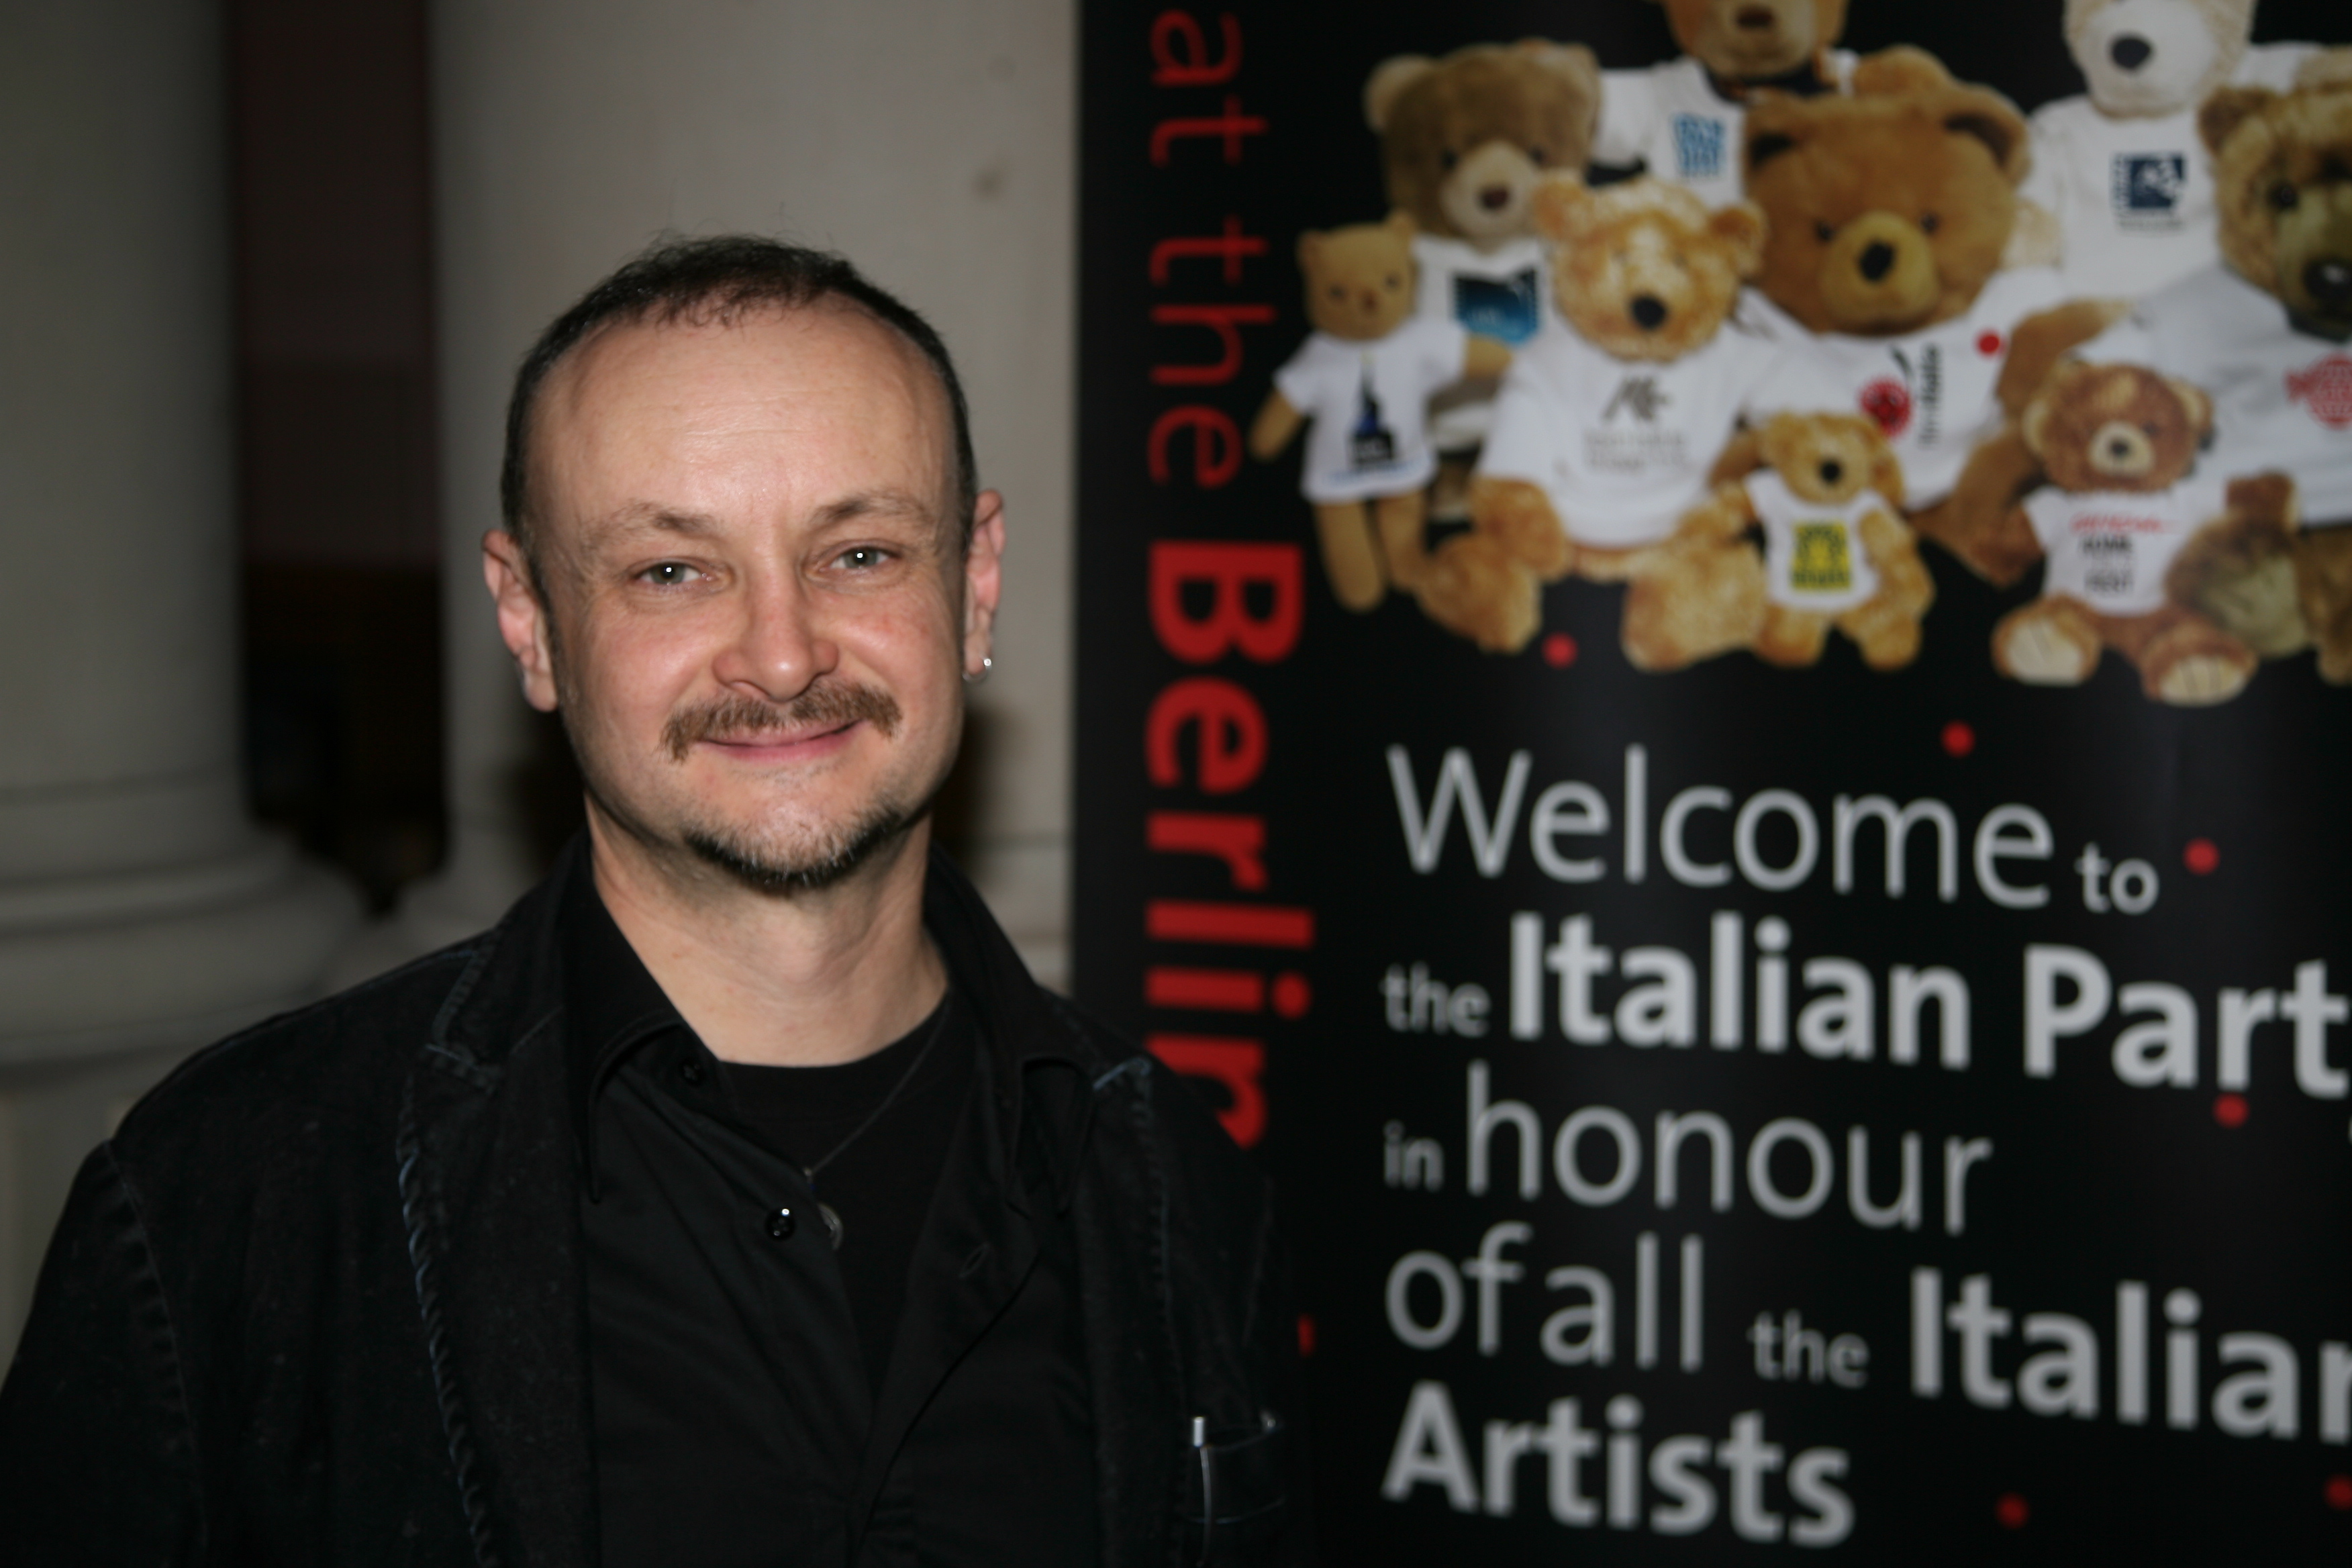 At the party in honor of Italian Artists at Berlin Film Festival